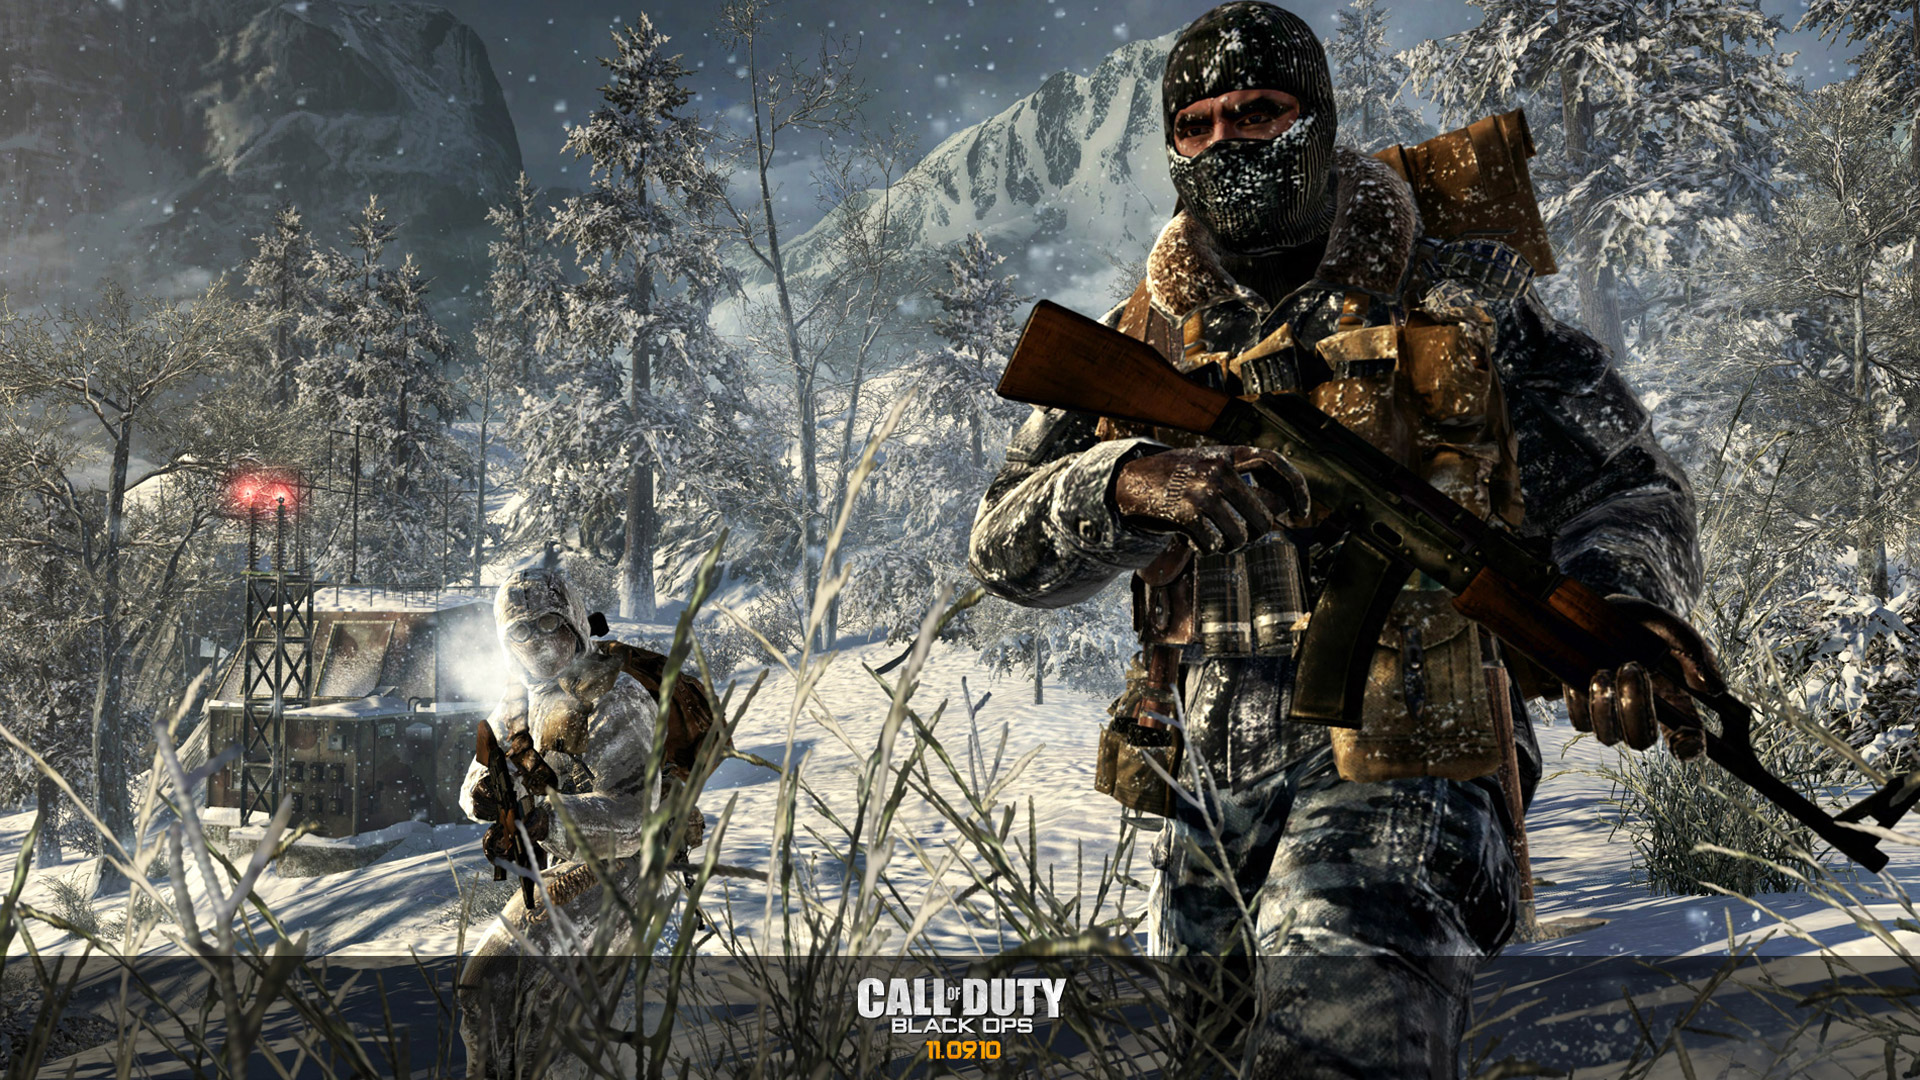 Call Of Duty Black Ops Wallpaper In